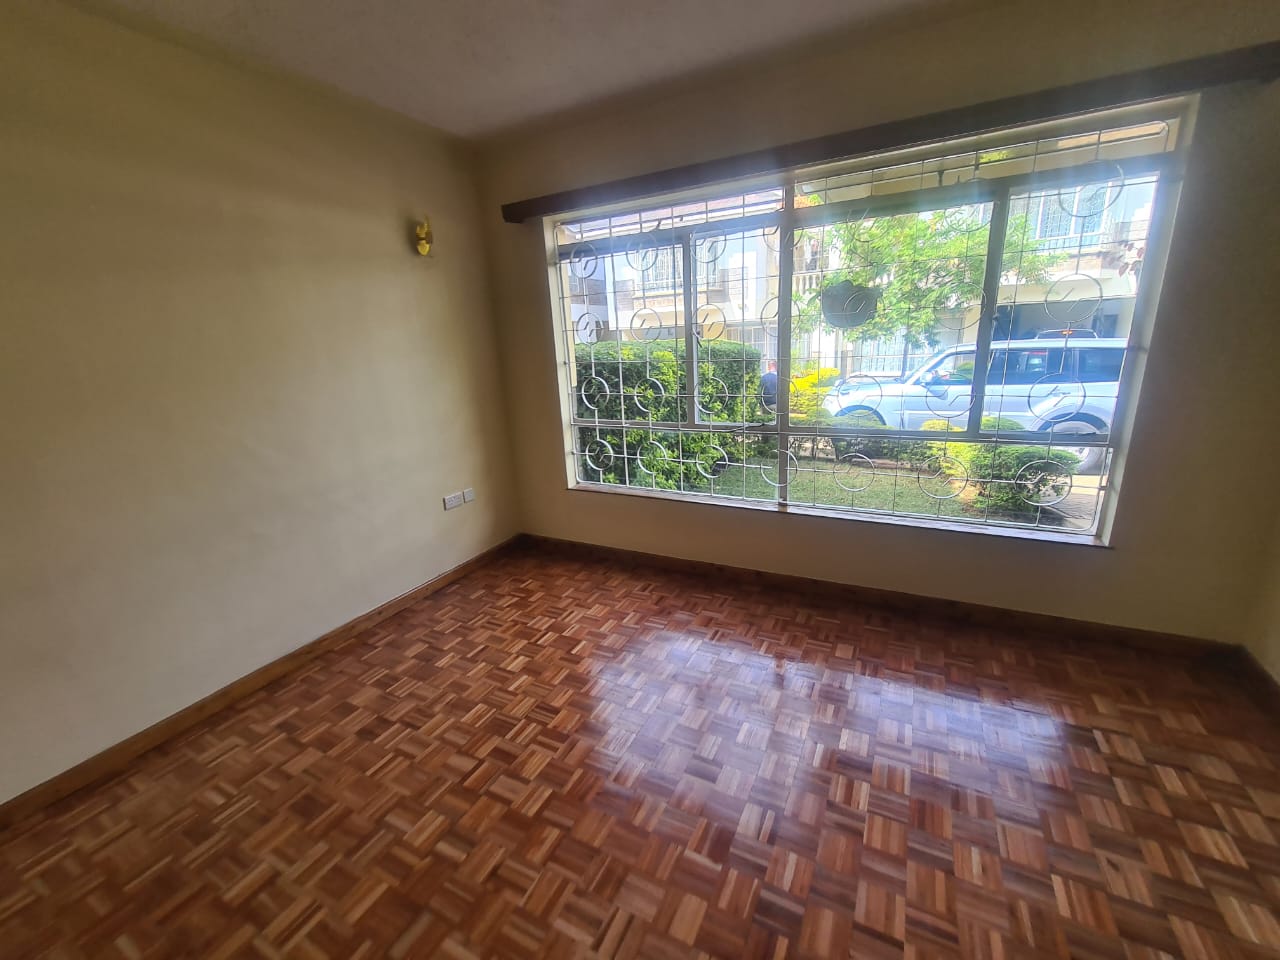 4 Bedrooms 2 Ensuite with SQ for rent at Ksh170kMonth in Kilimani (9)